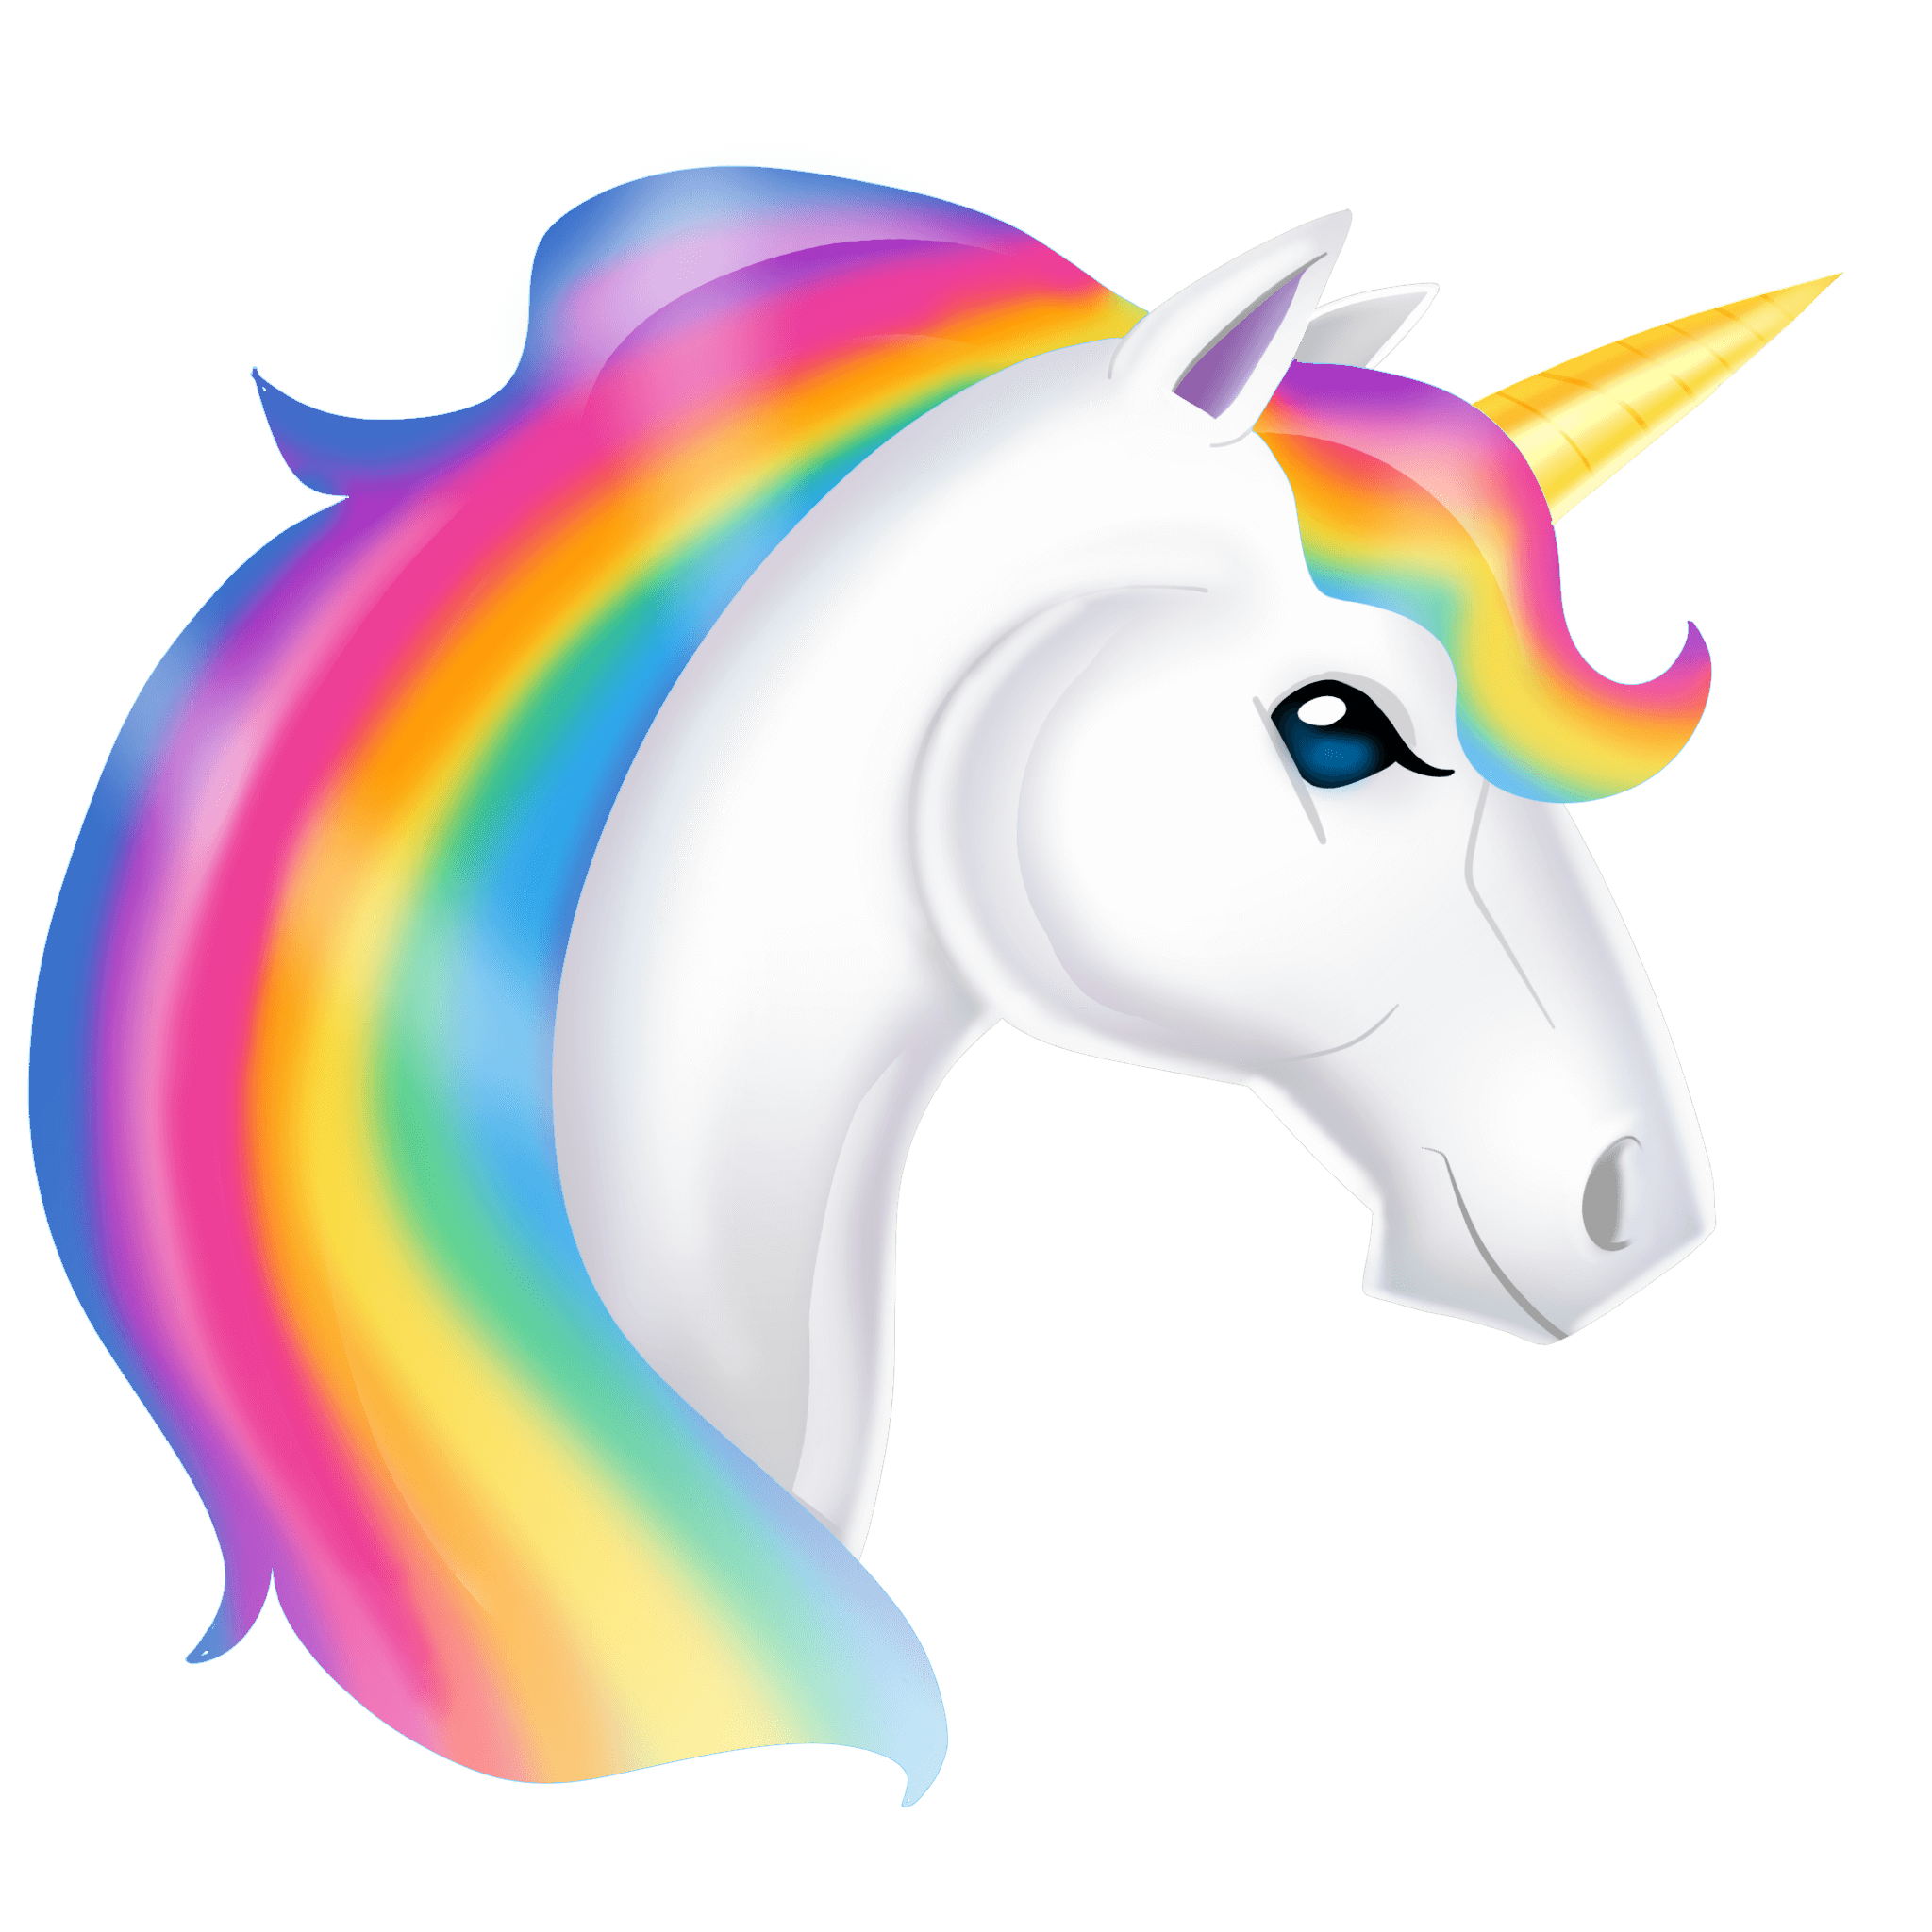 Download Rainbow Colors The Horses Head Unicorn Png Transparent Background Free Download 48621 Freeiconspng PSD Mockup Templates